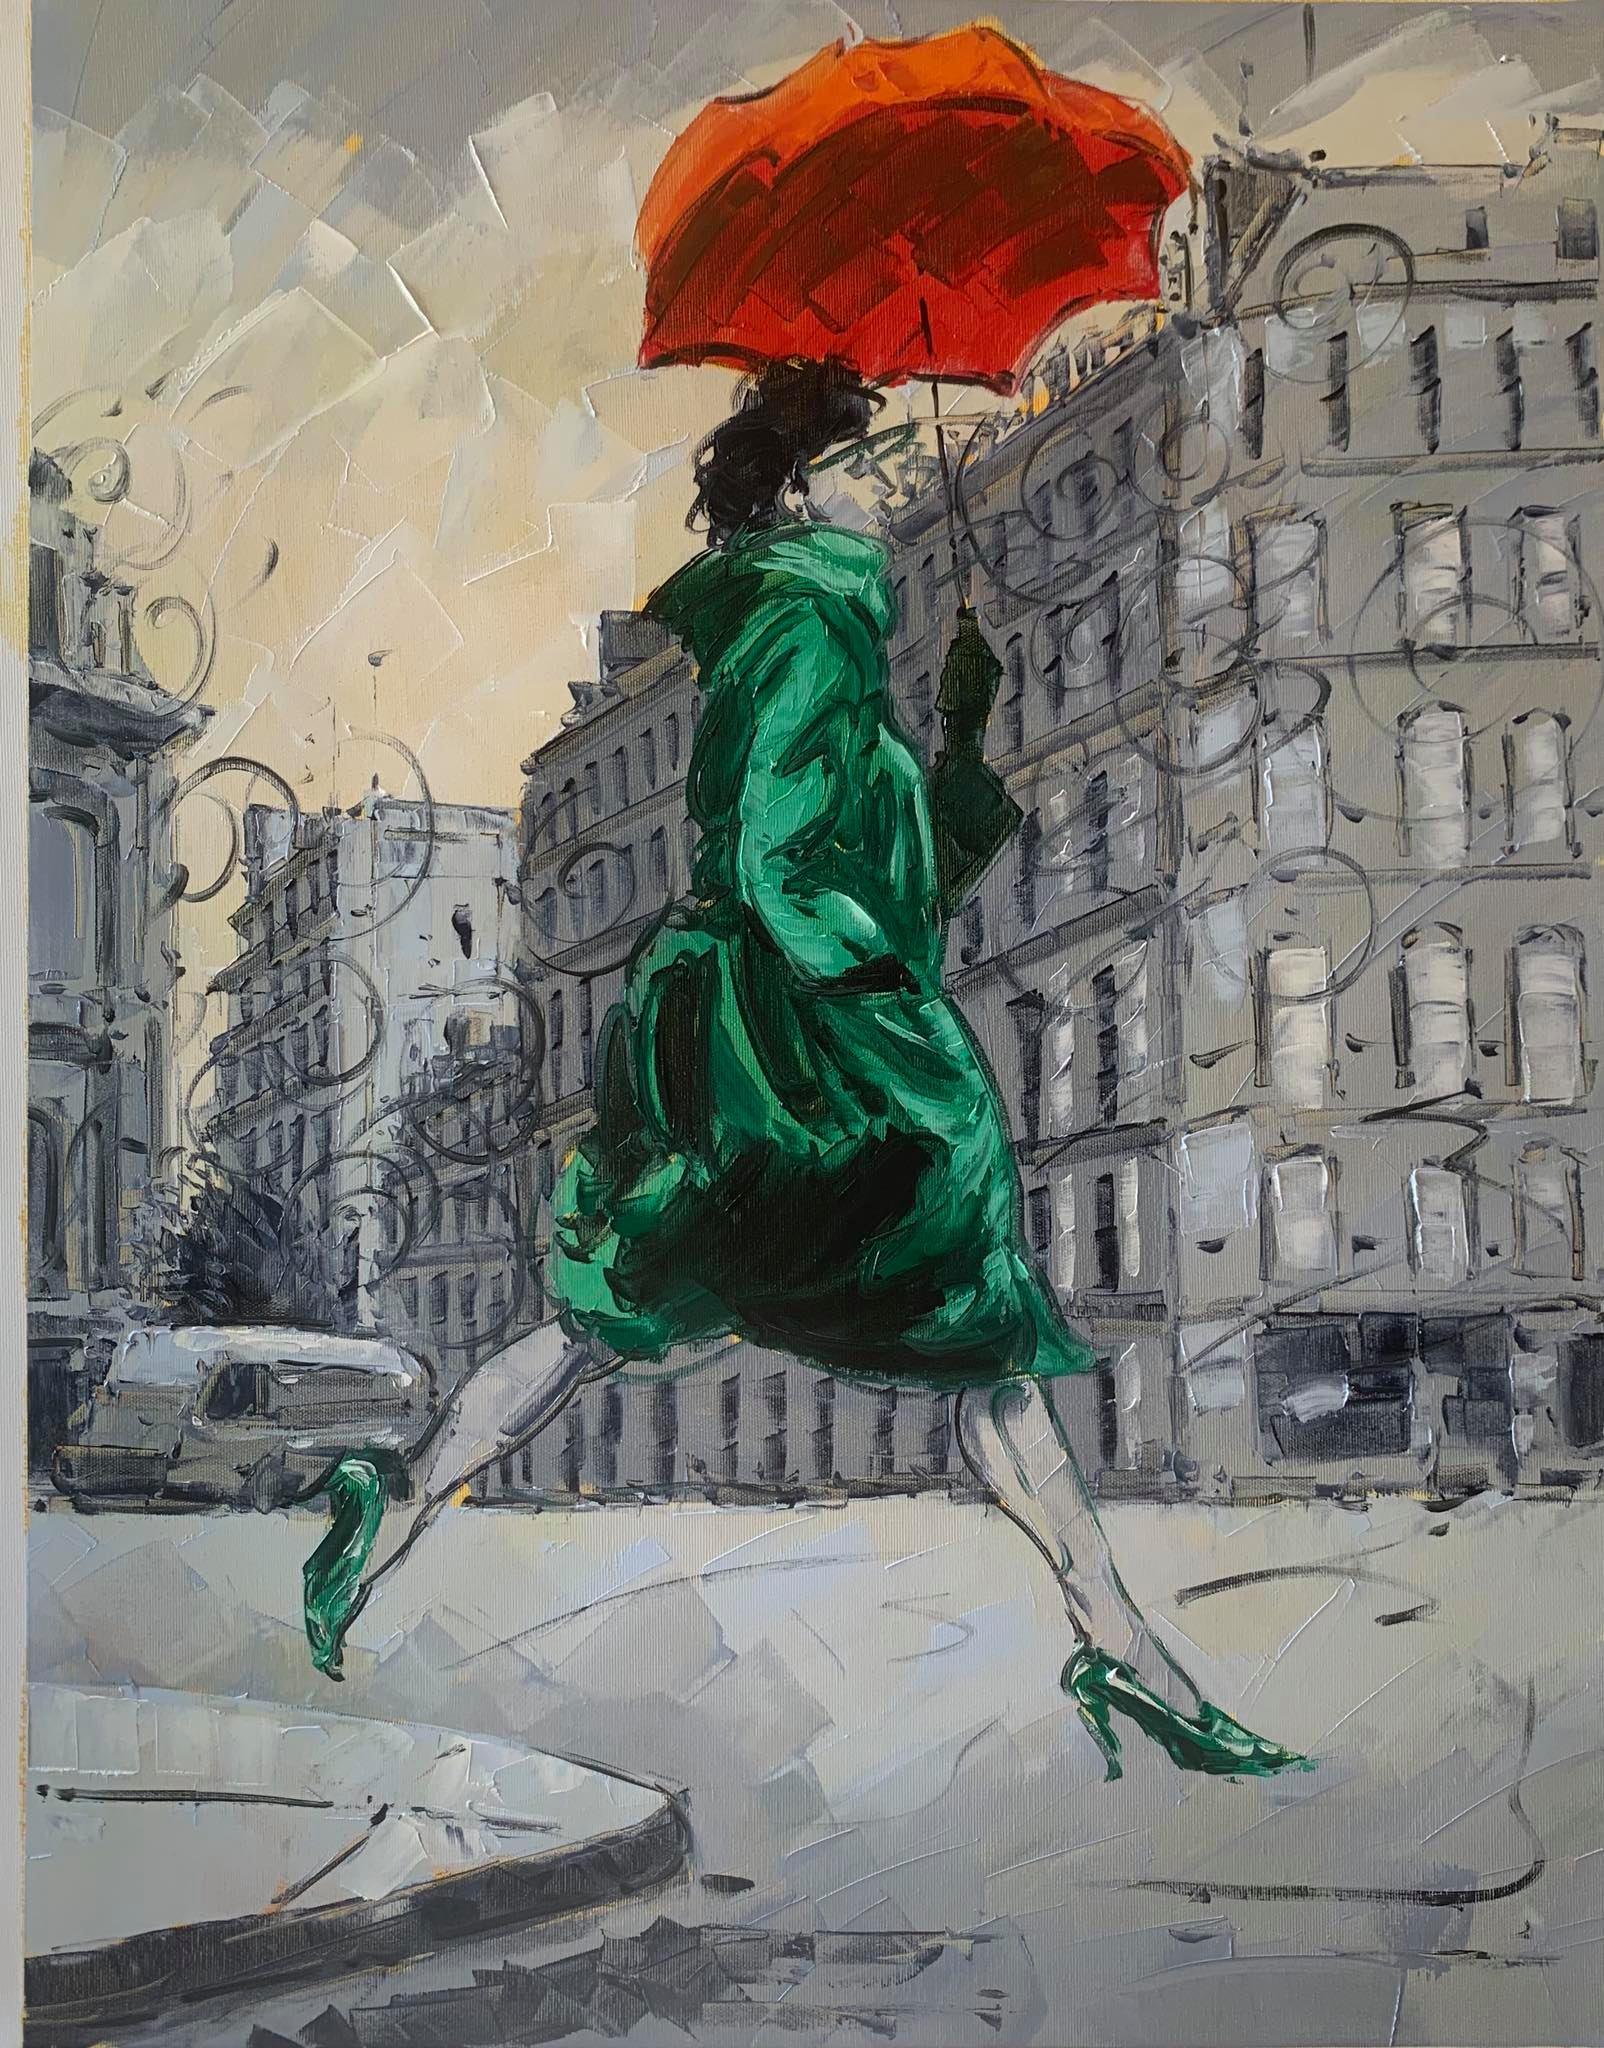 Coco in Paris is a series of four paintings. They can be sold as a set $8800 or individually. $2200. The Coco series is by a young Cuban artist now living in Barcelona. Coco series was painted plein air  just recently on a trip to Paris.  The